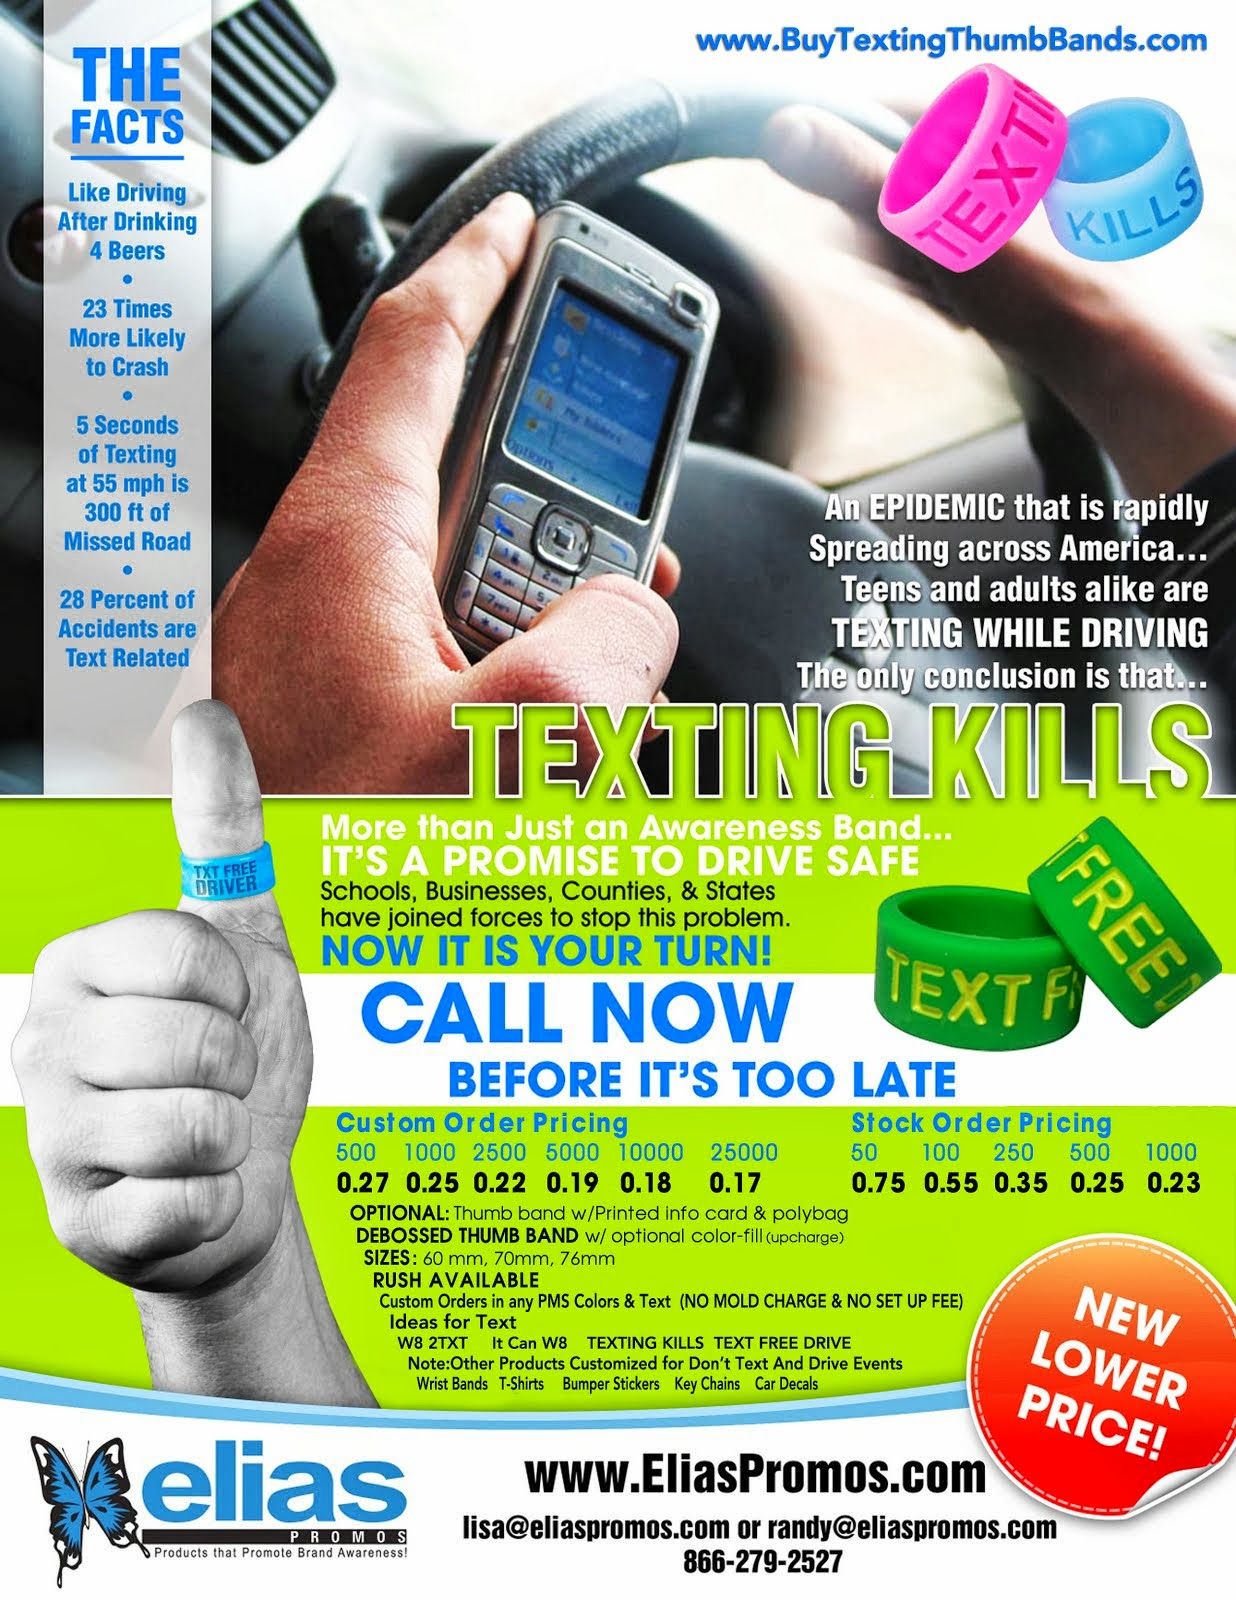 Texting Thumb Bands Texting While Driving Kills: Don't Text and Drive and Text Free Driver